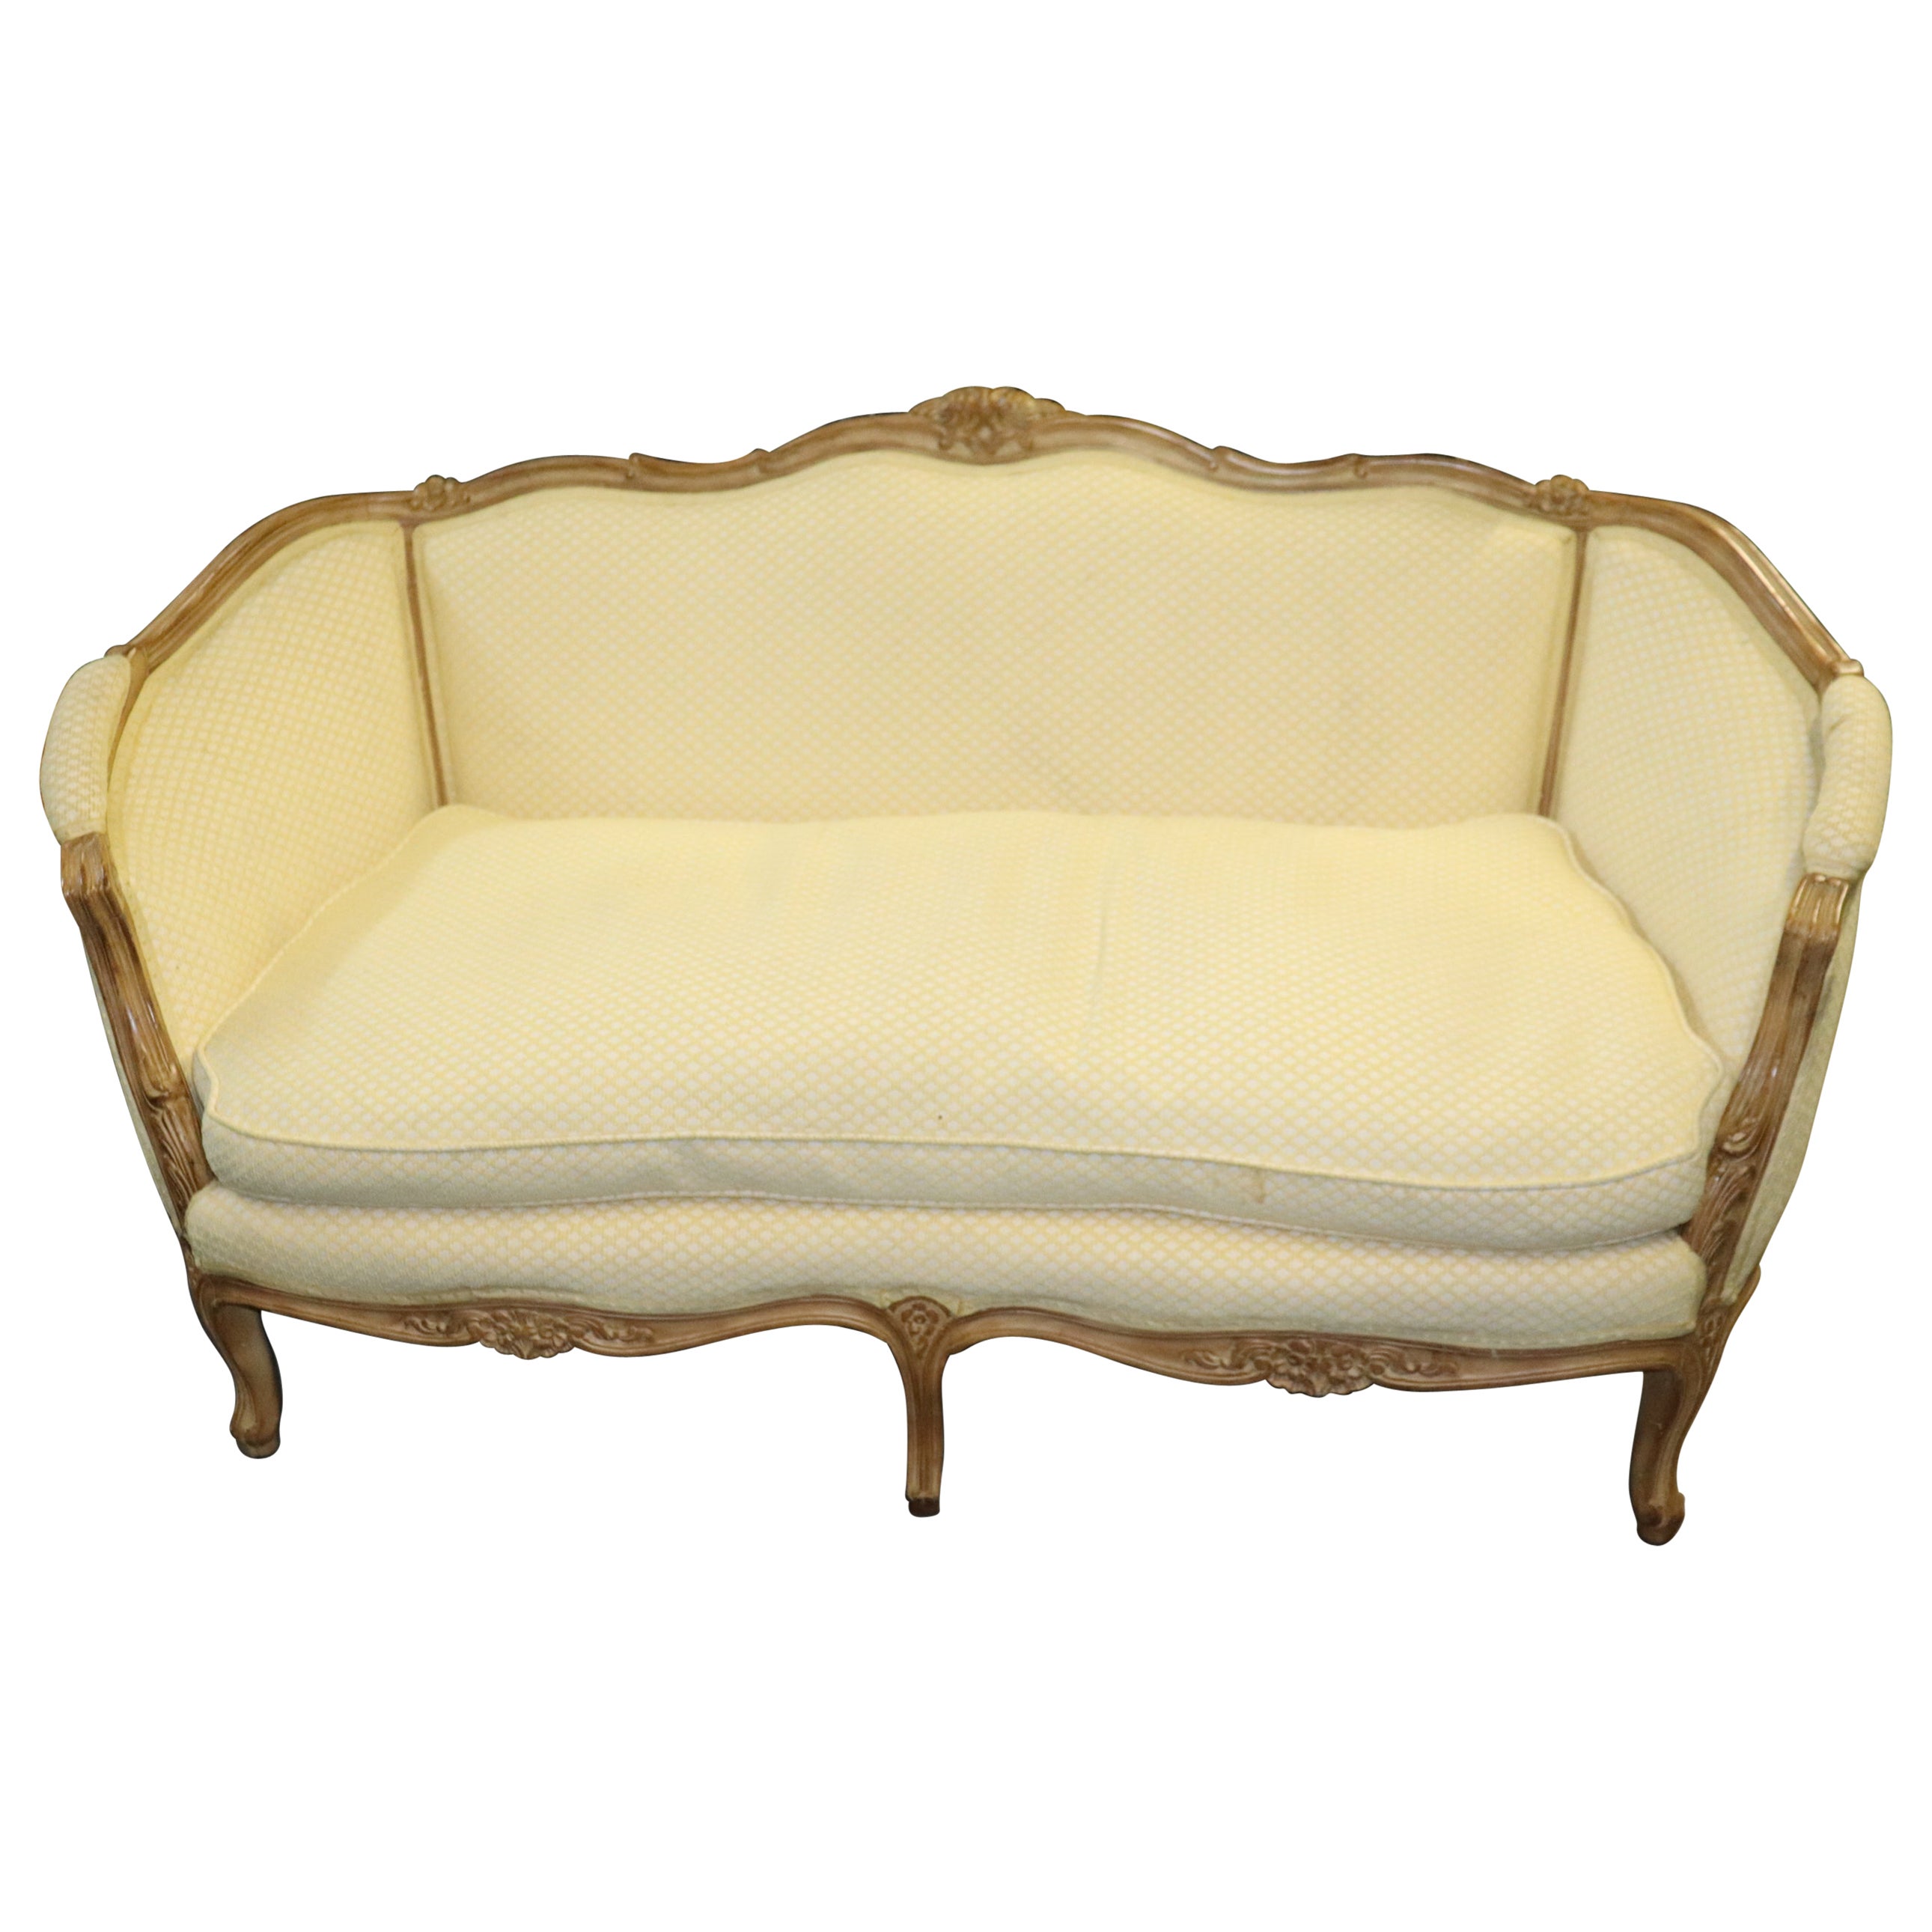 Carved Walnut French Louis XV Settee Canape circa 1940s